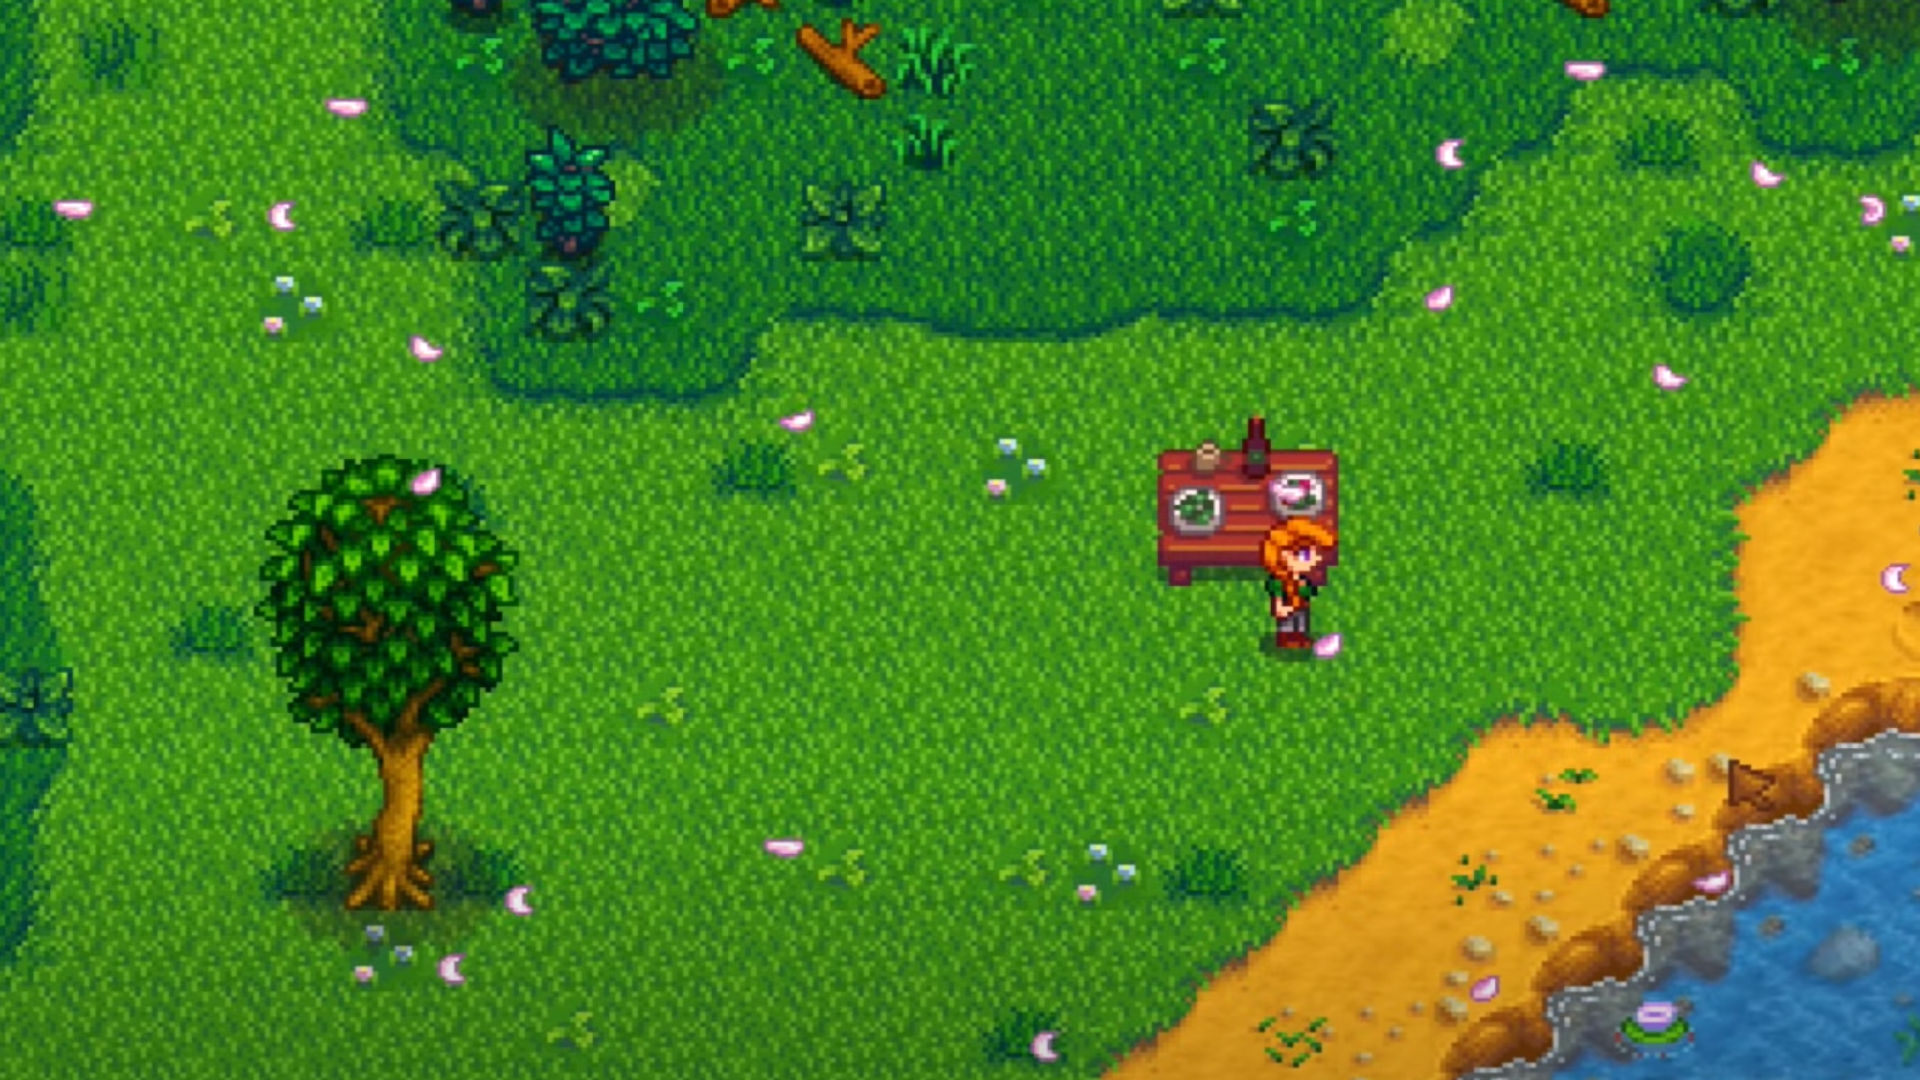 Stardew Valley Leah gifts, schedule, heart events, and questions ...